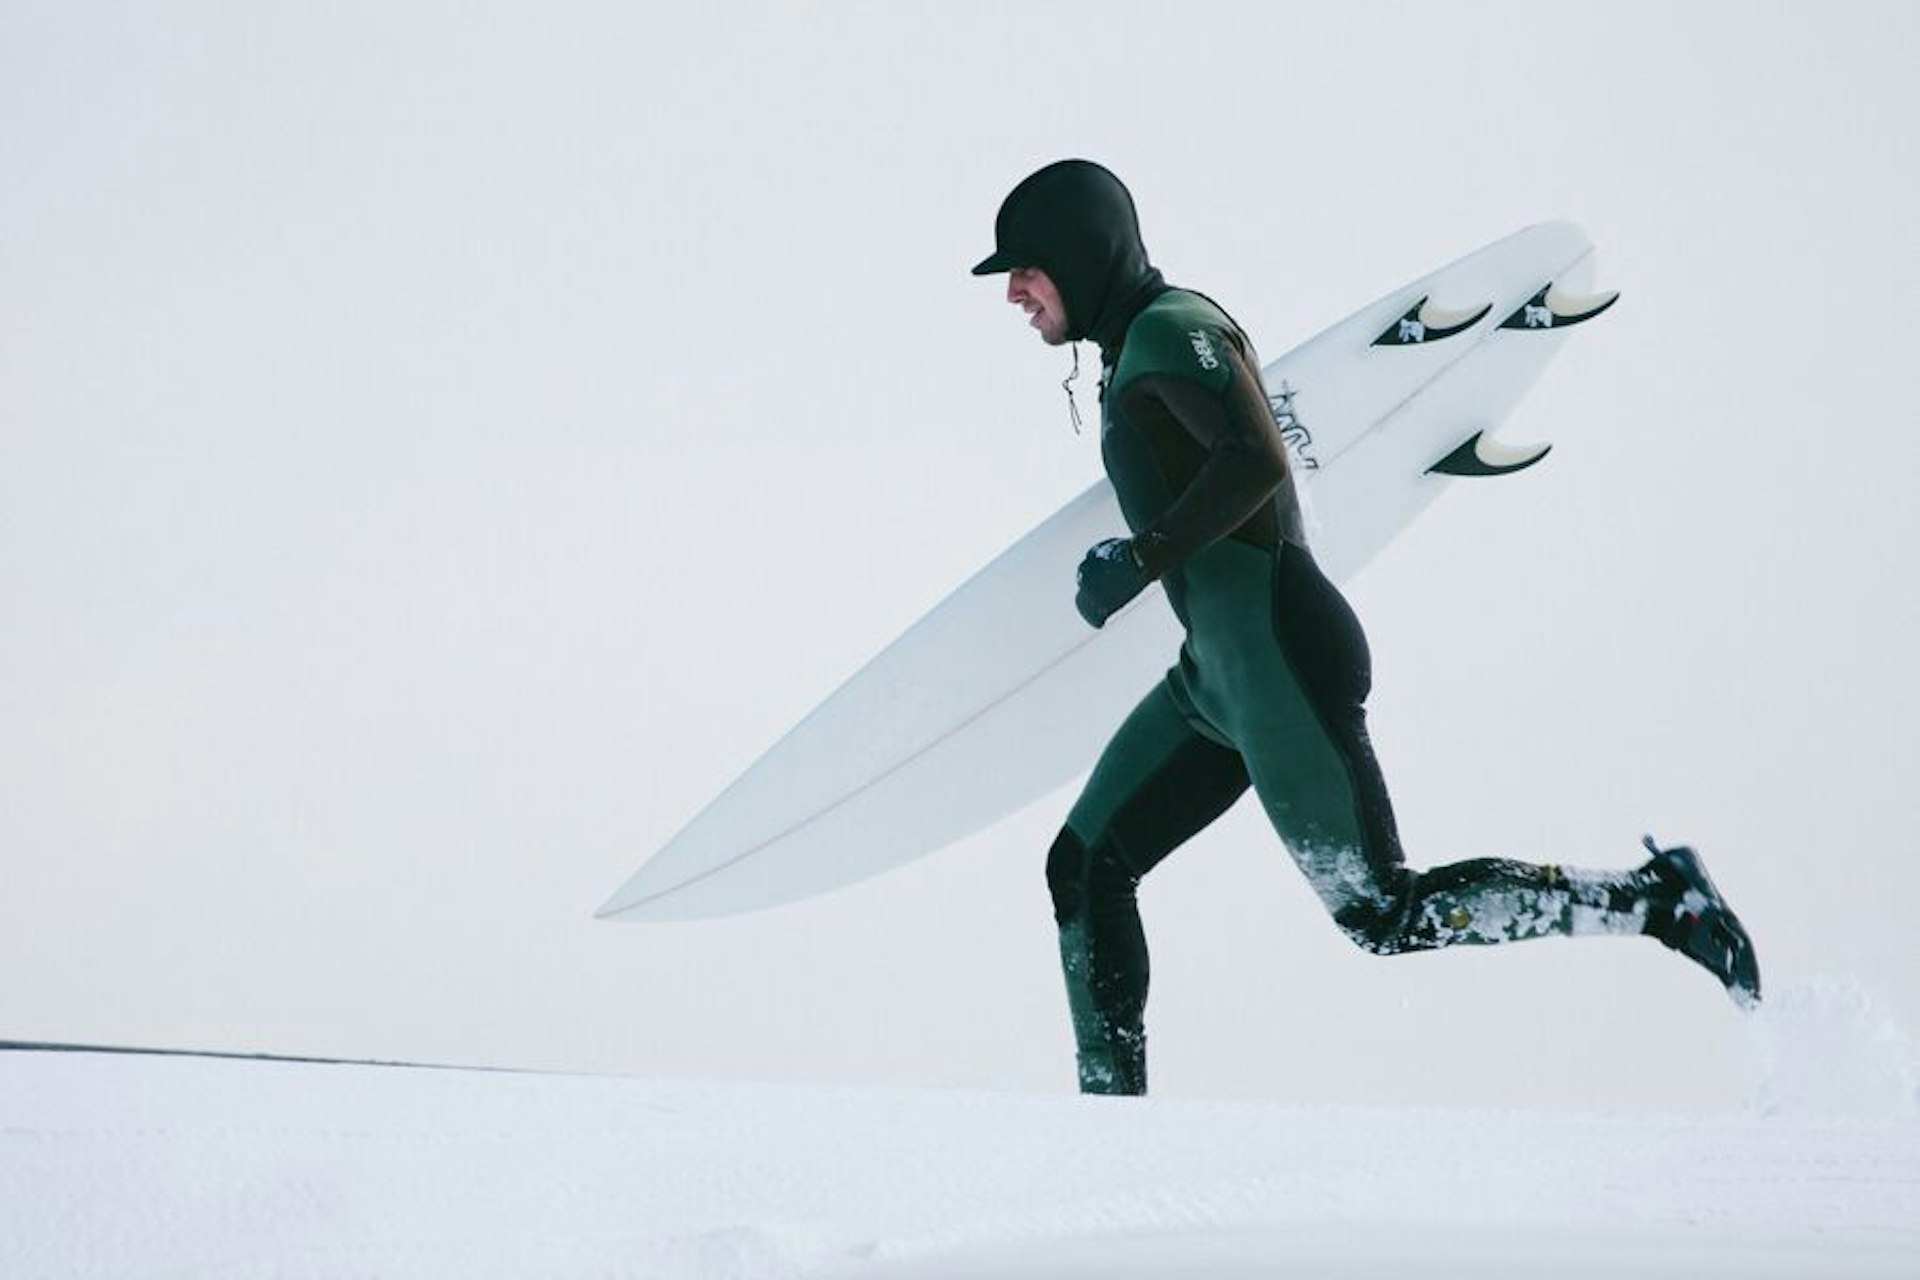 In Pictures: Surfing in snow on the East Coast